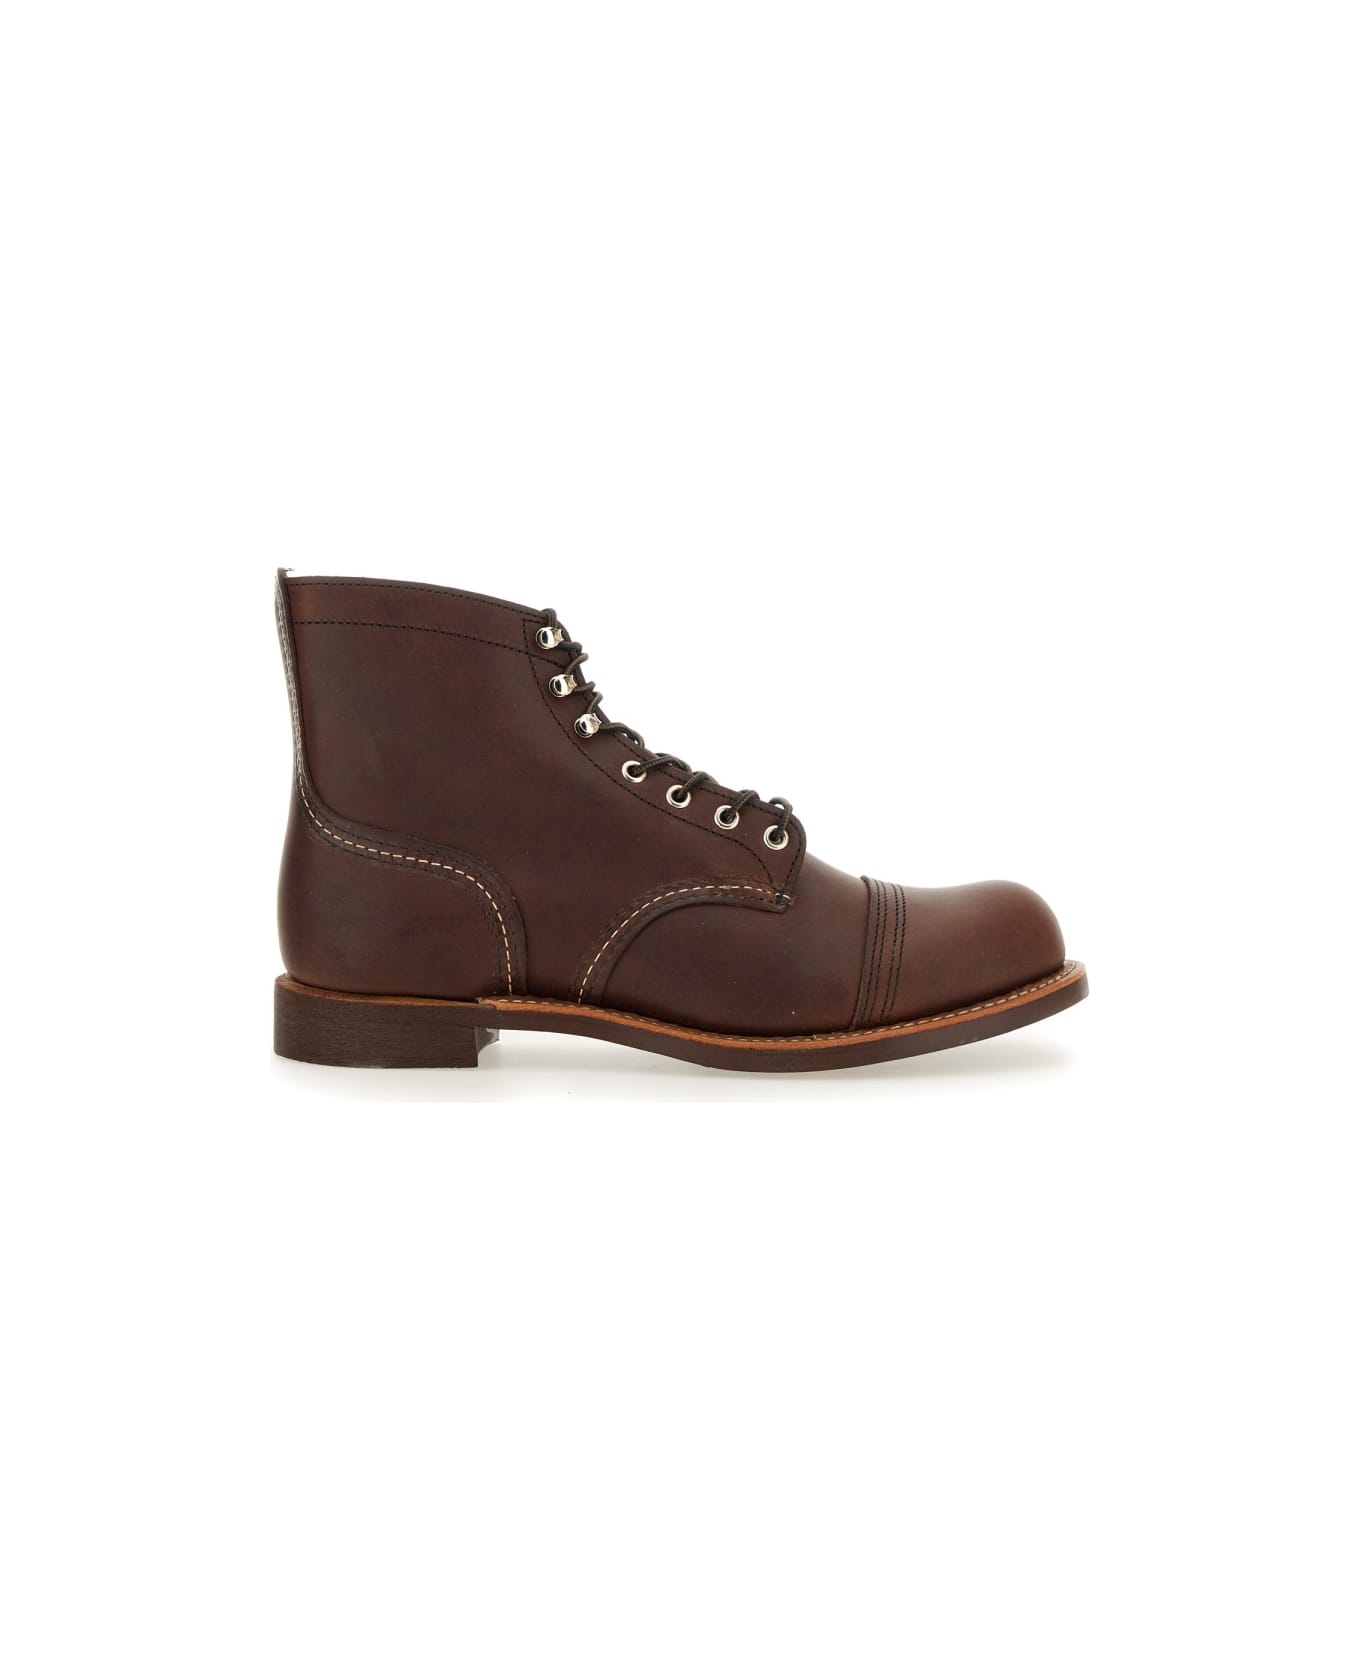 Red Wing Leather Boot - BROWN ブーツ